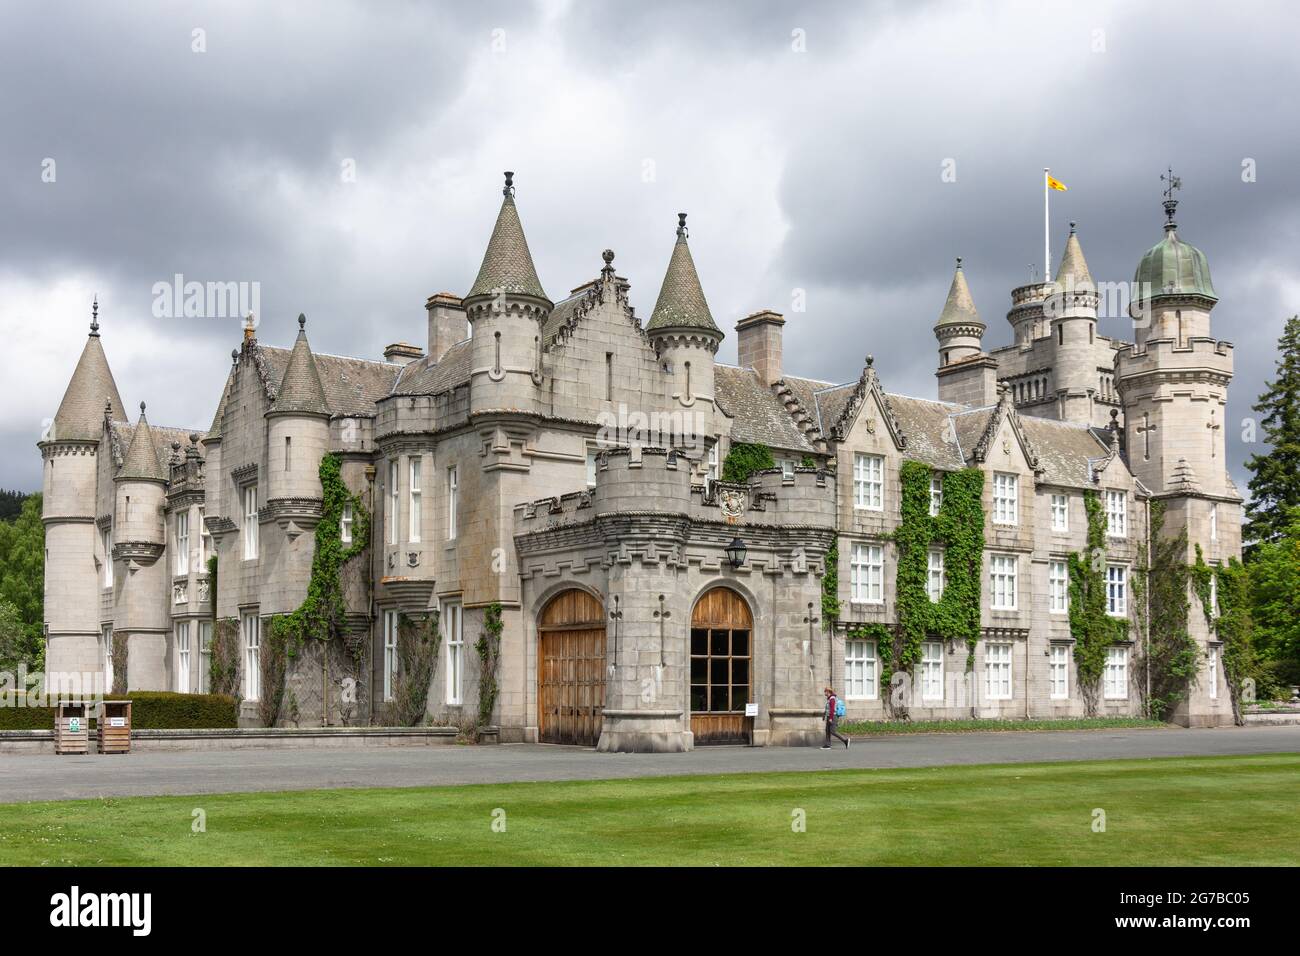 Balmoral Castle and Gardens from South Lawn, Royal Deeside, Aberdeenshire, Scotland, United Kingdom Stock Photo